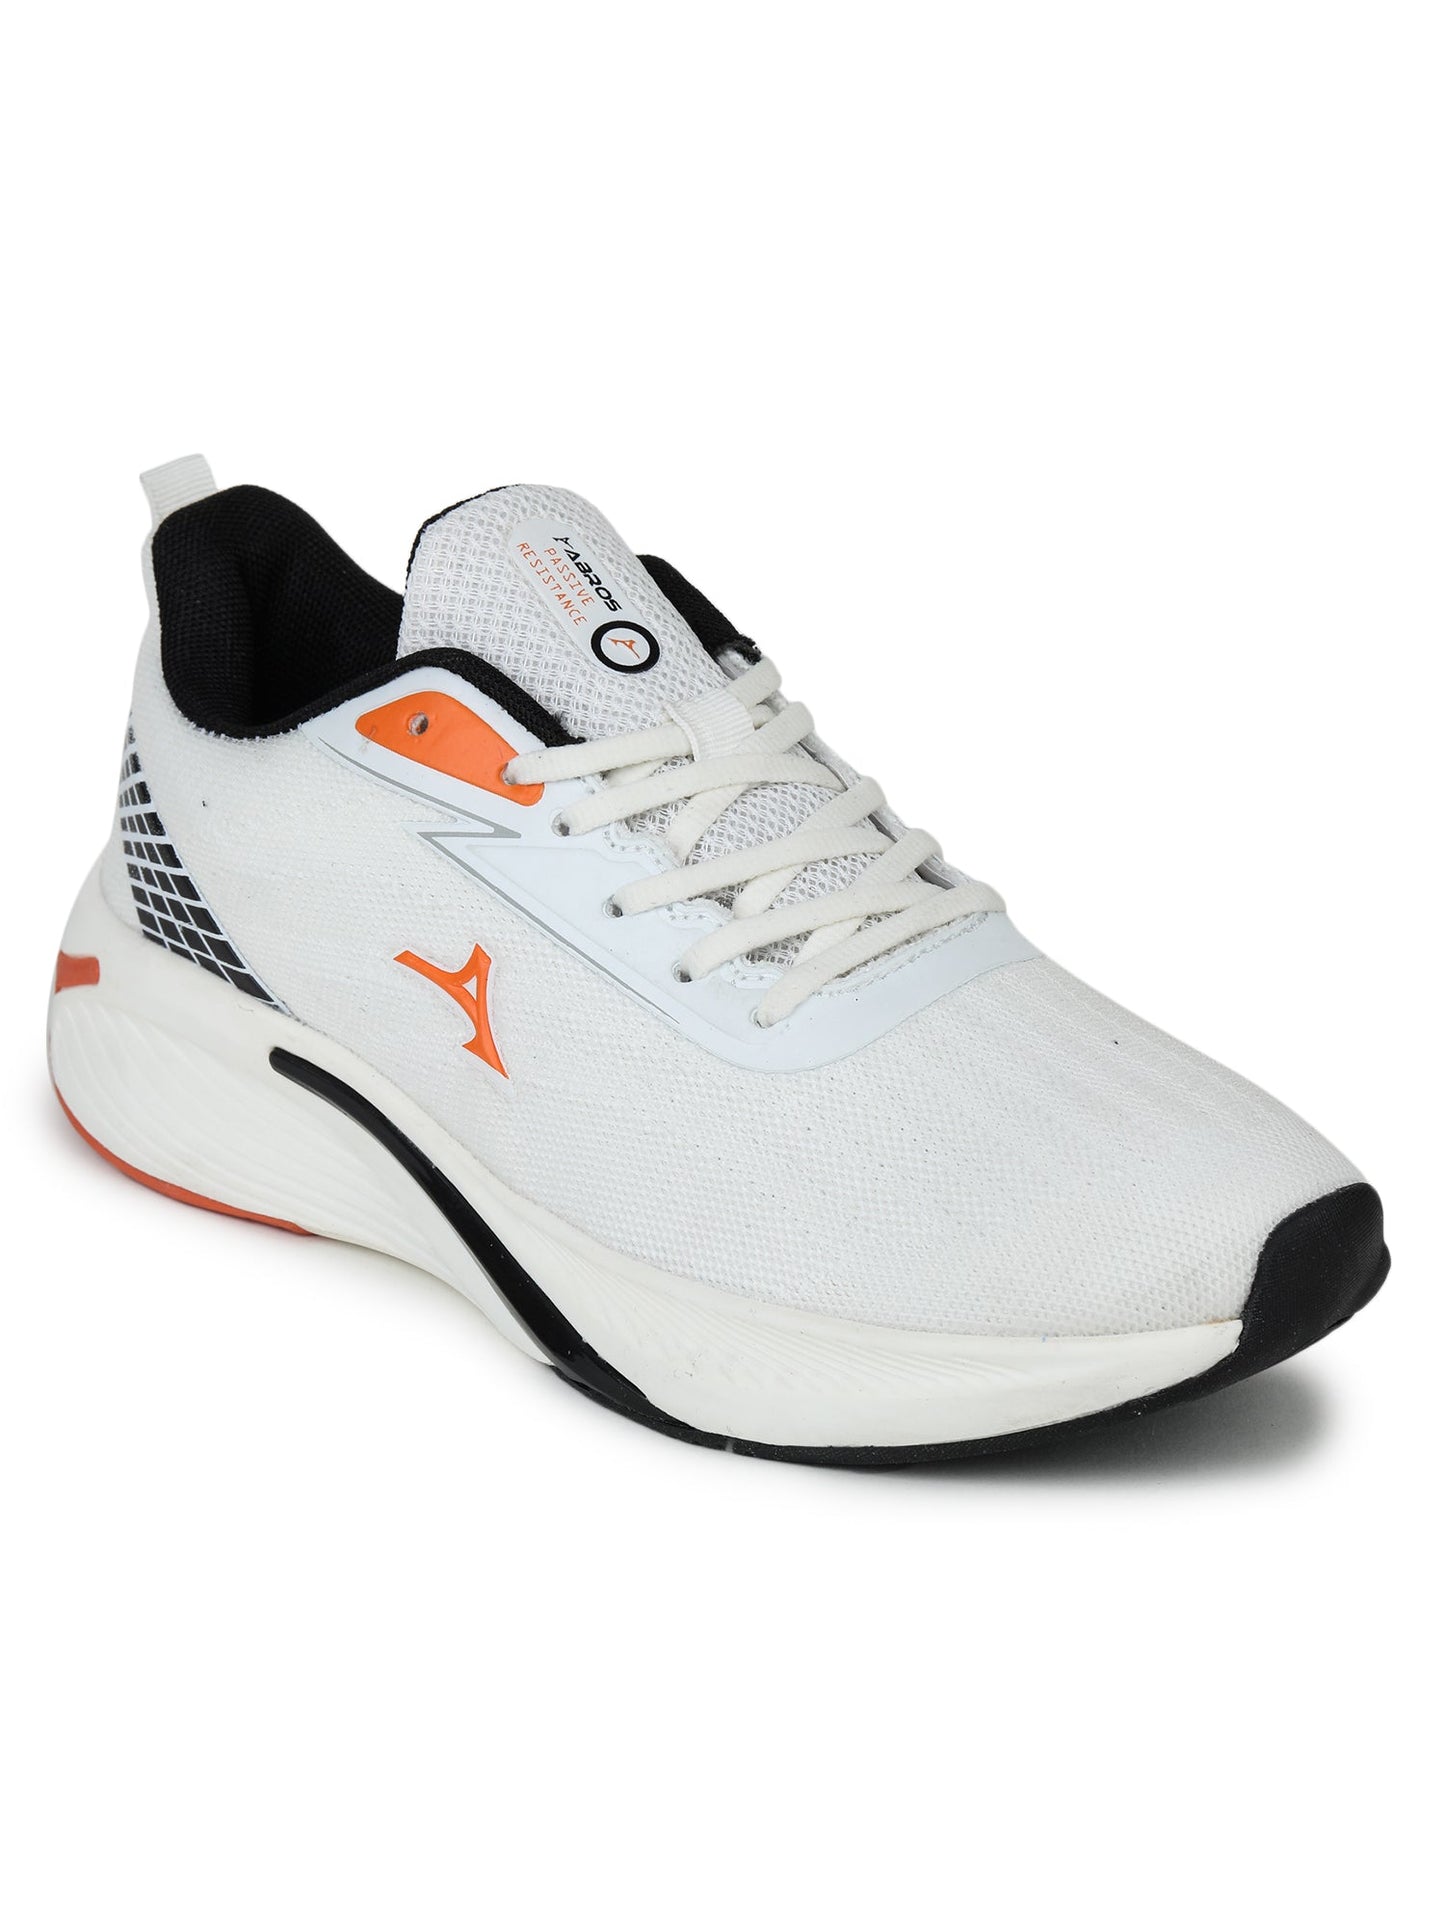 ABROS SLAYER SPORT-SHOES For MEN'S